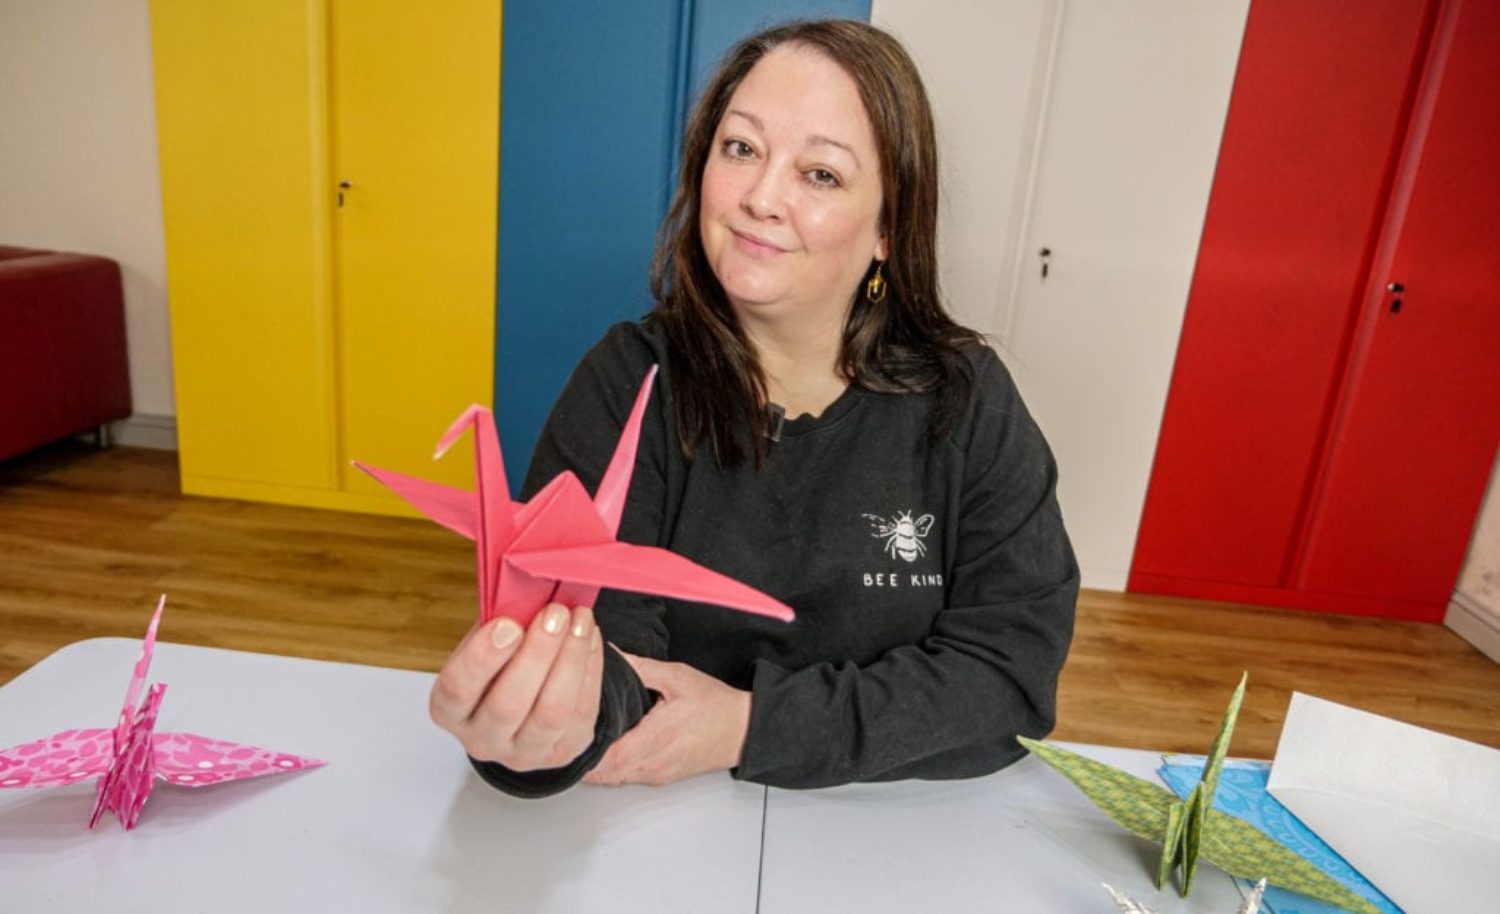 People encouraged to get crafty at home for origami exhibition at Bridgend’s field hospital